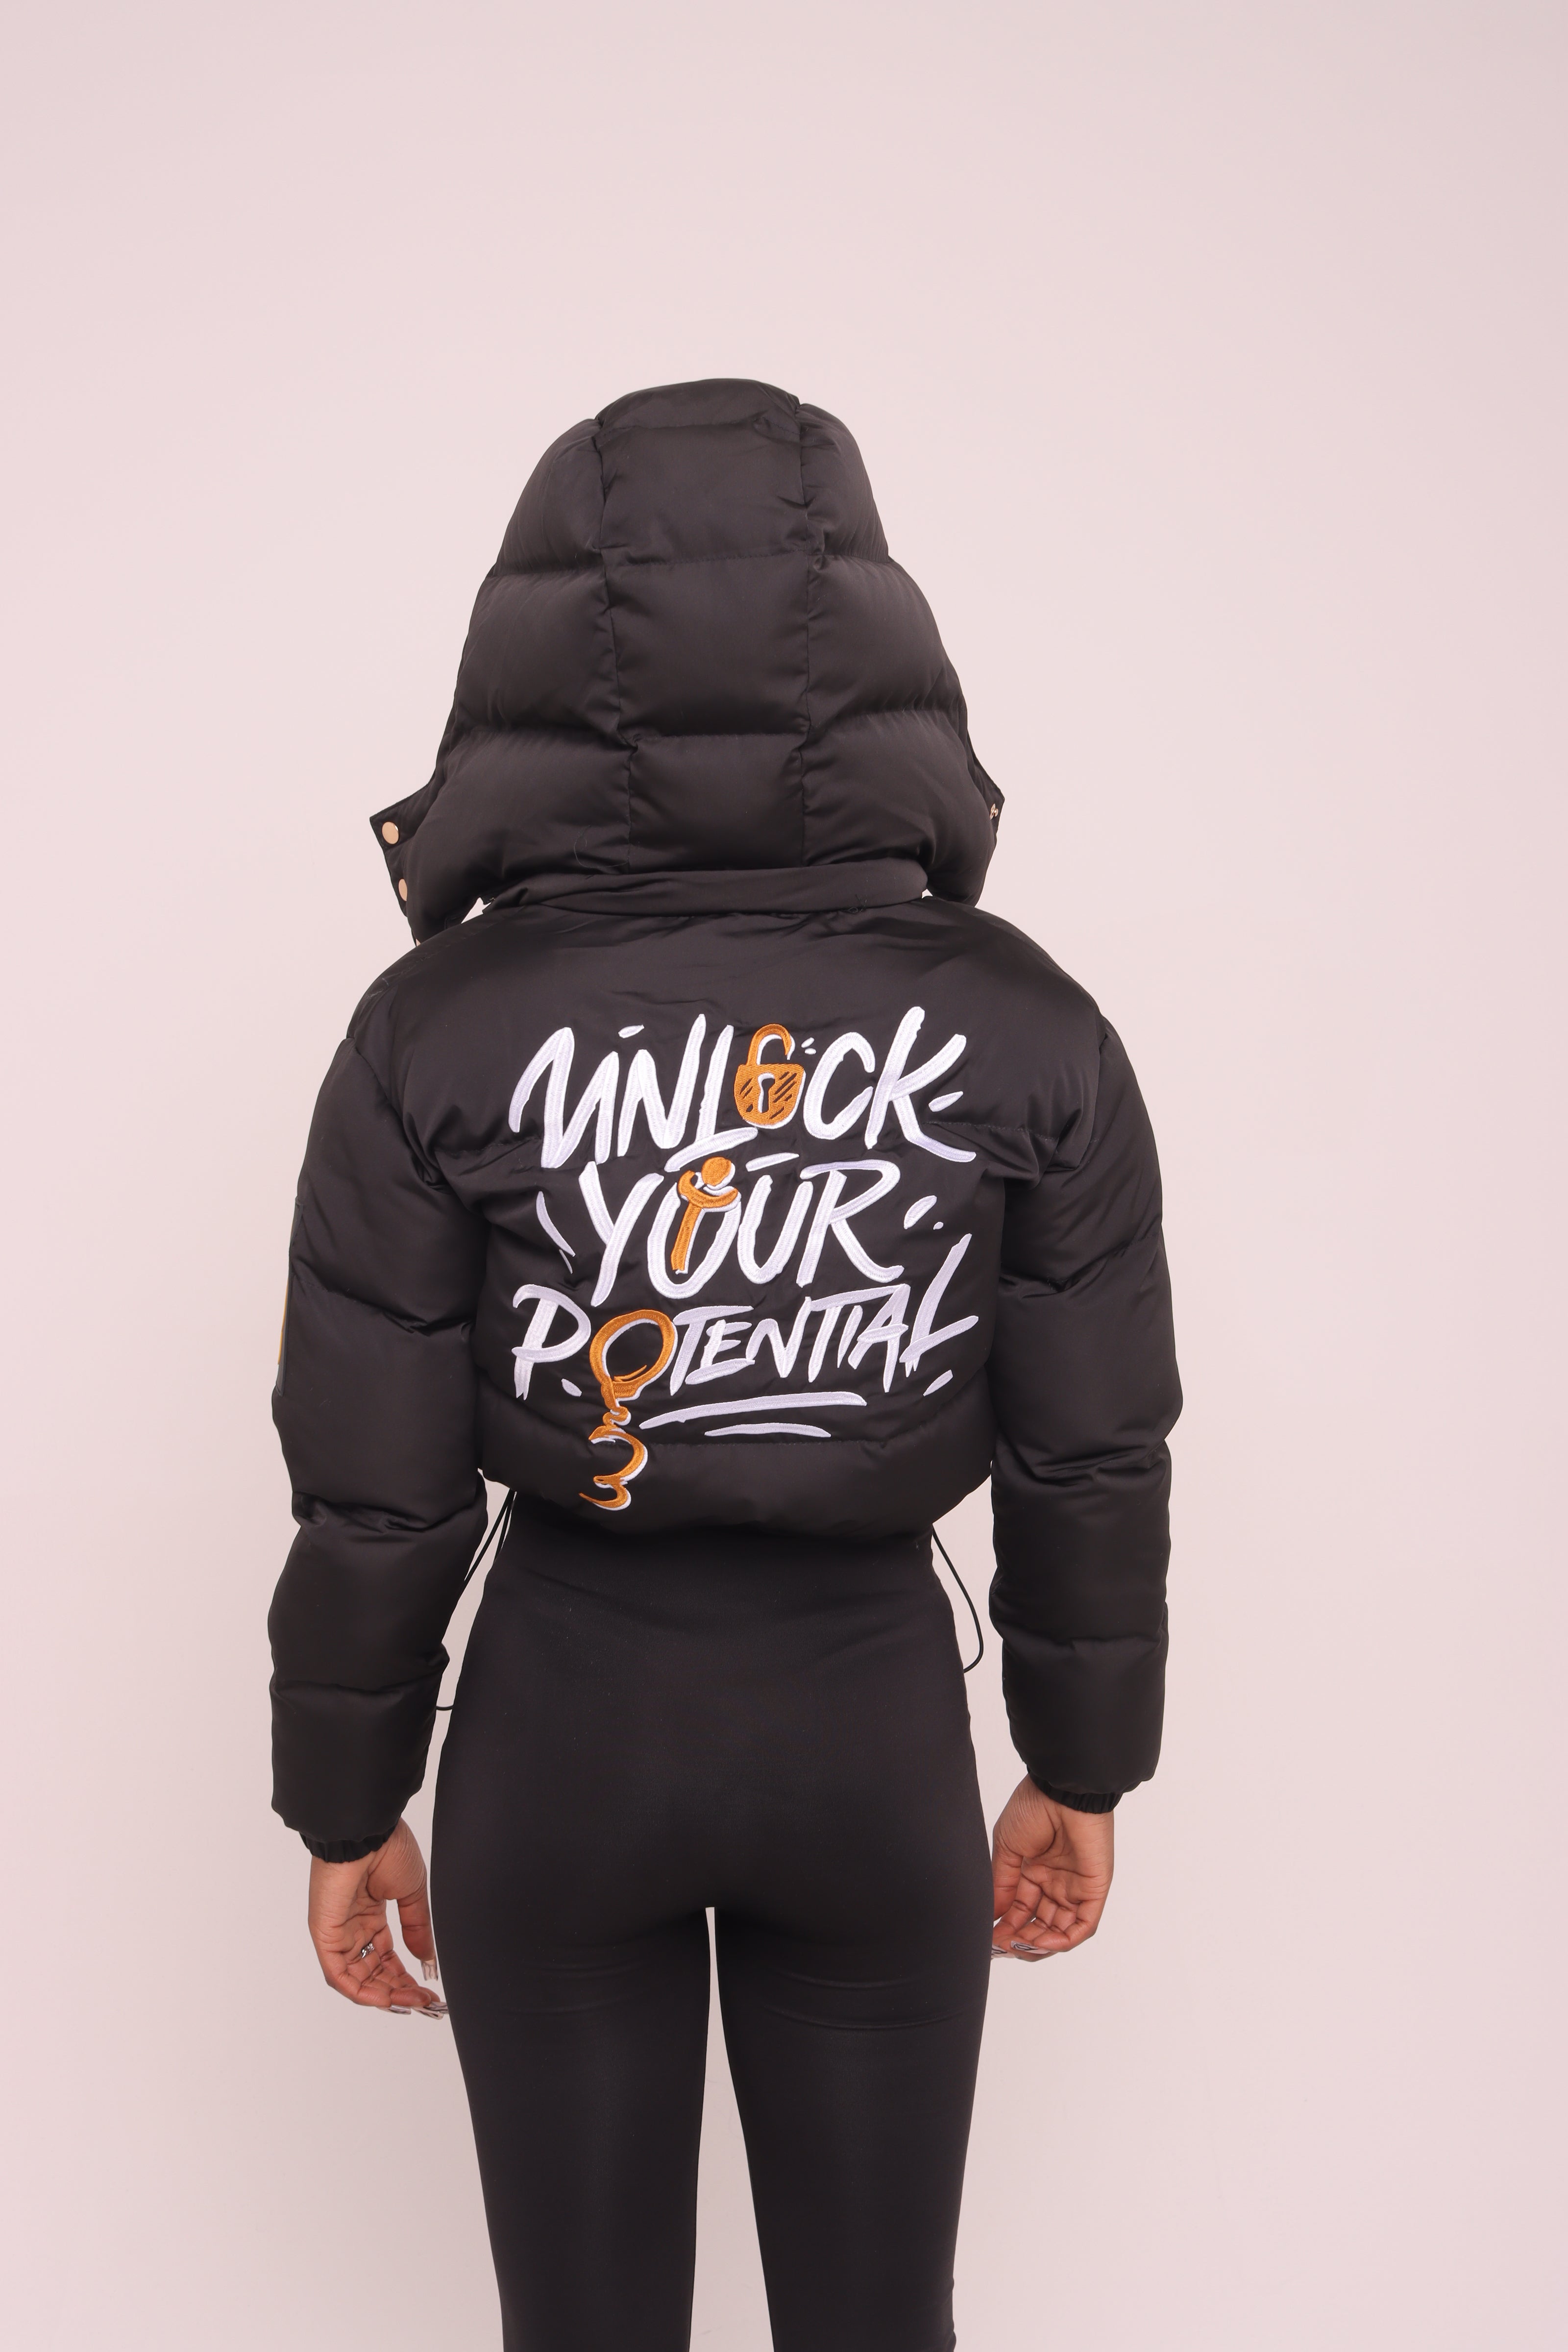 Cropped Black "Unlock Your Potential" Puffer Jacket